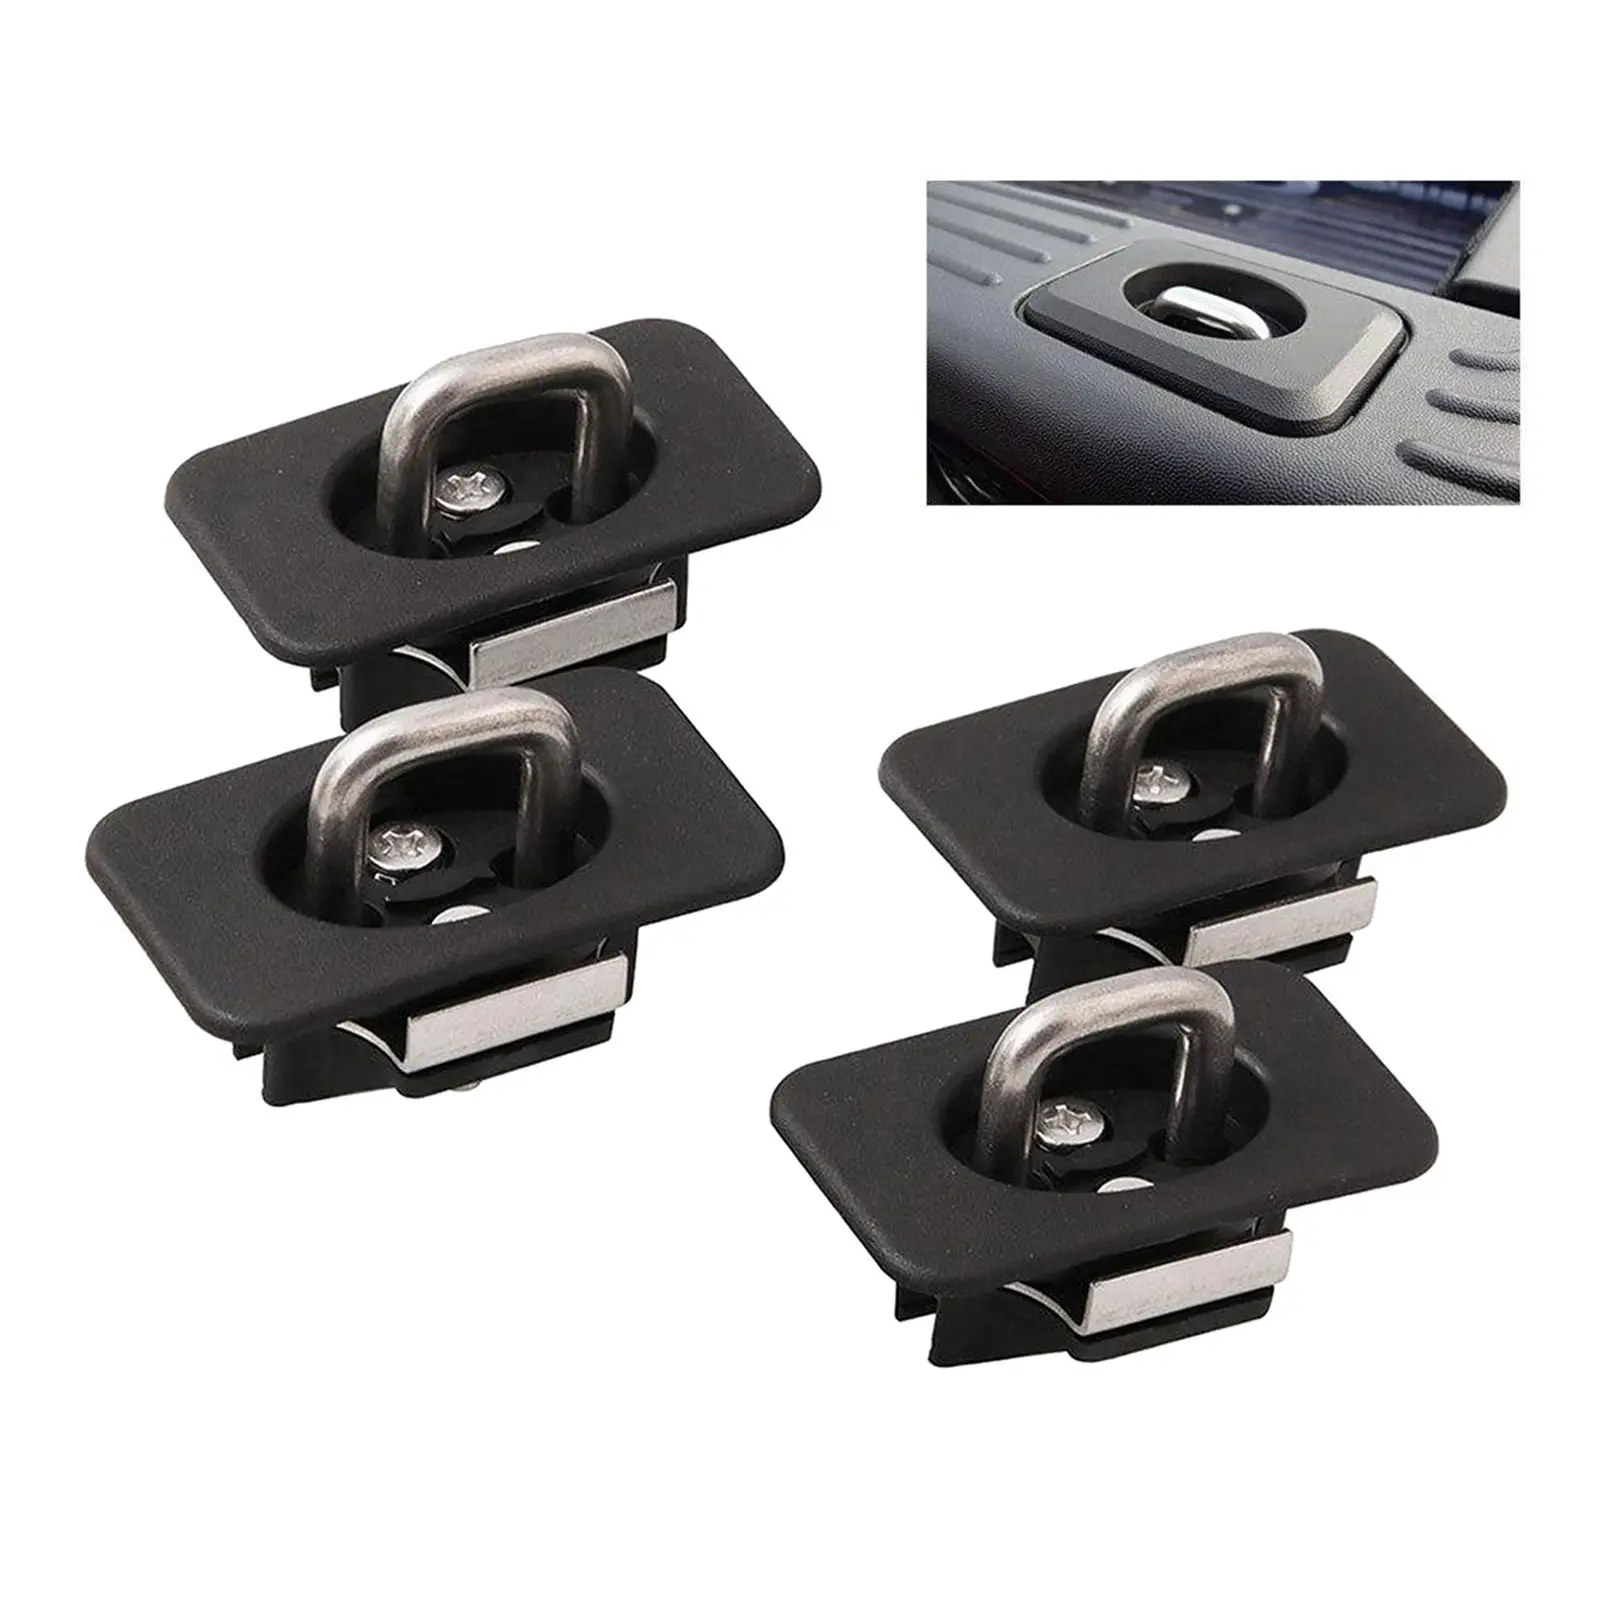 4x Truck Tie-Down Anchors Hook Fit for  Raptor F 150 1998-2014 Car Part